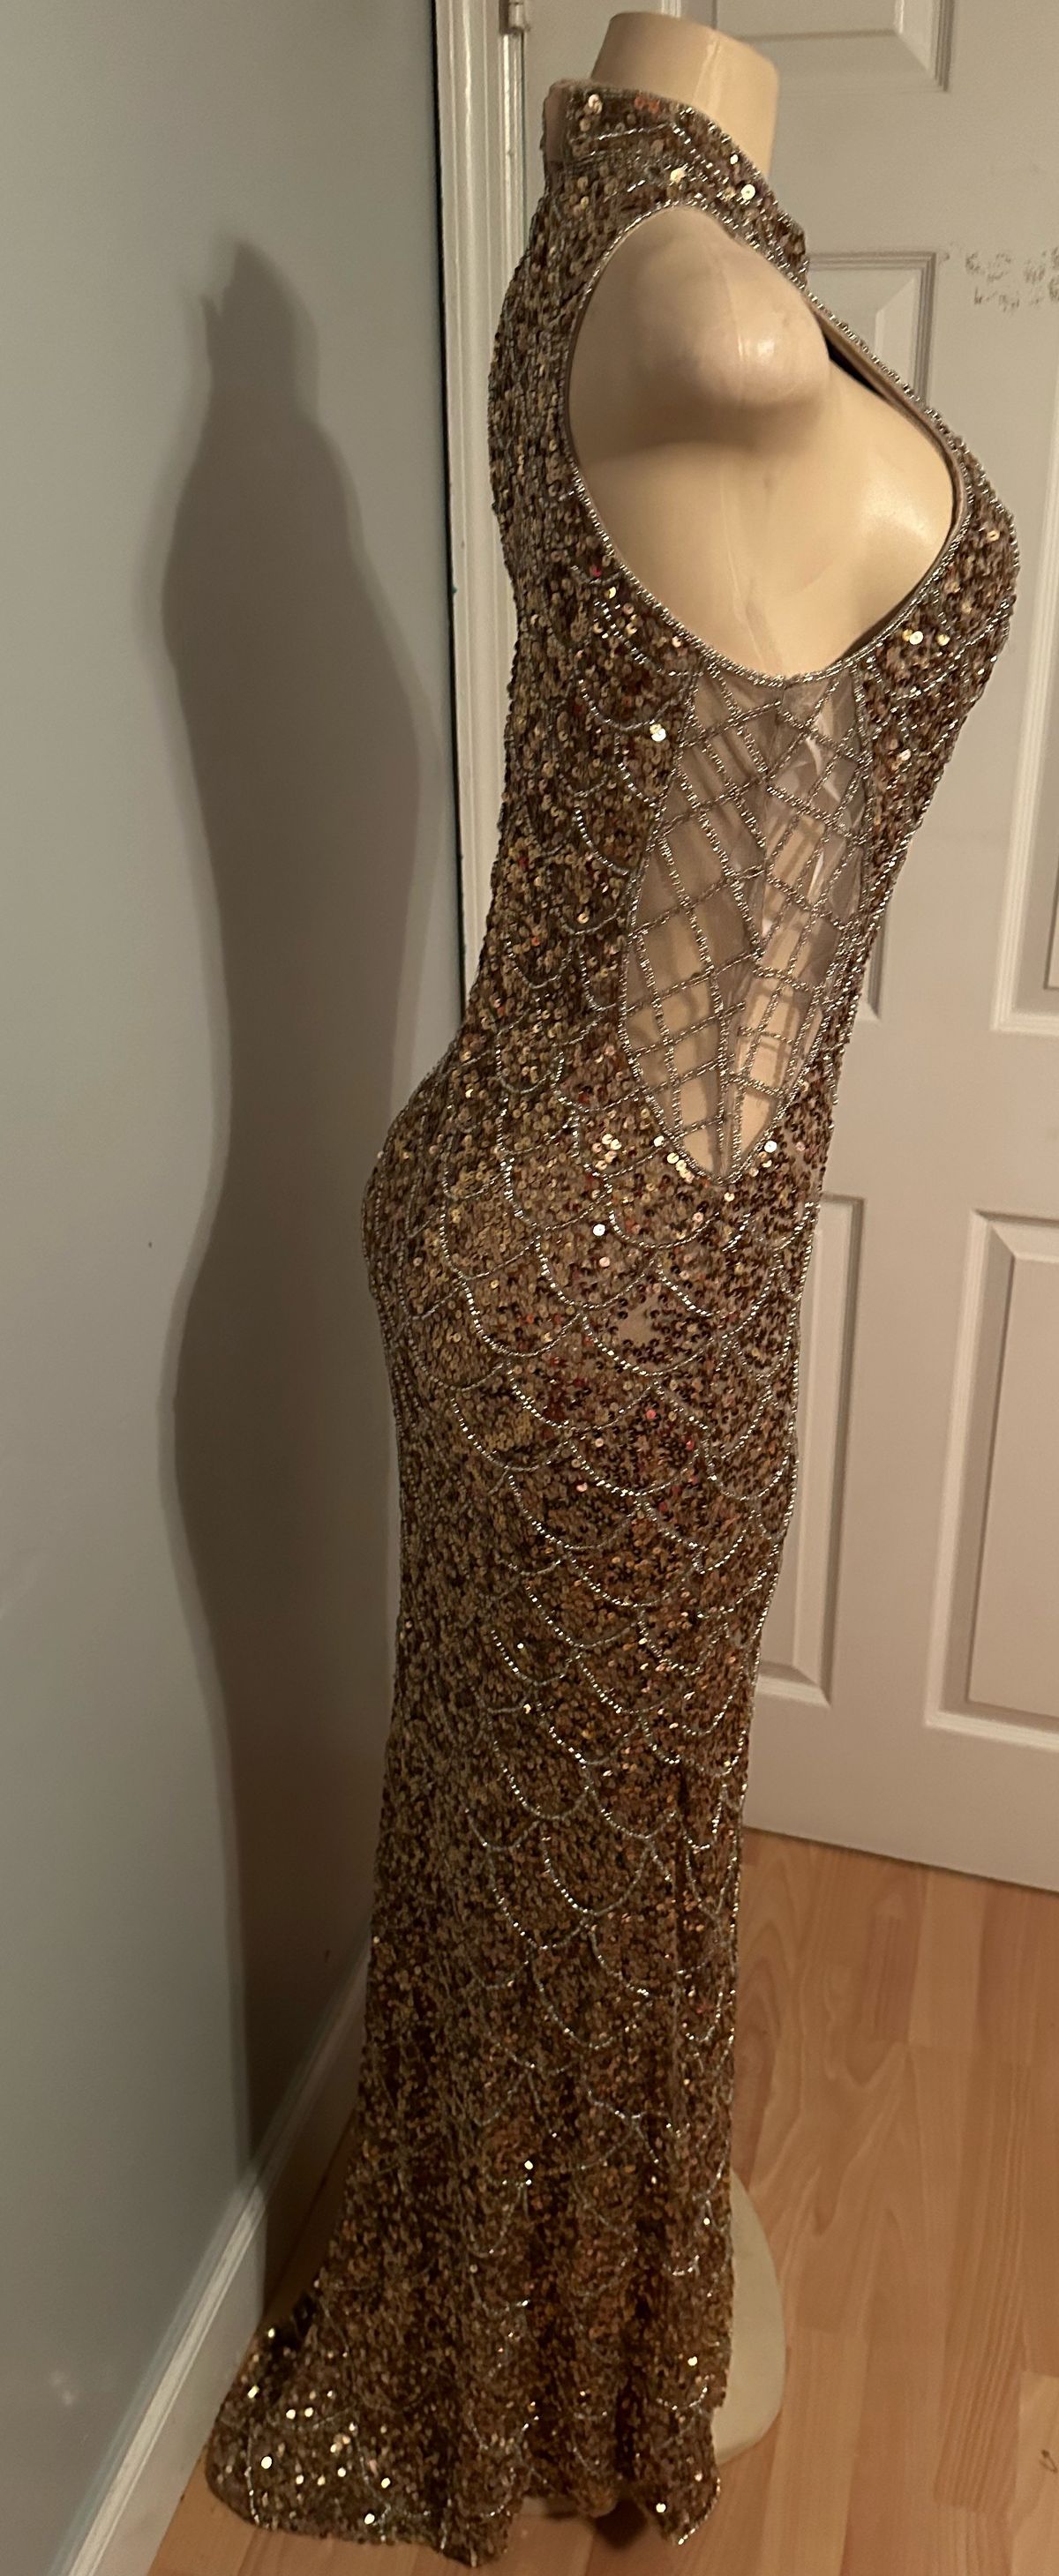 Mac Duggal Size 8 Prom High Neck Sheer Nude Mermaid Dress on Queenly